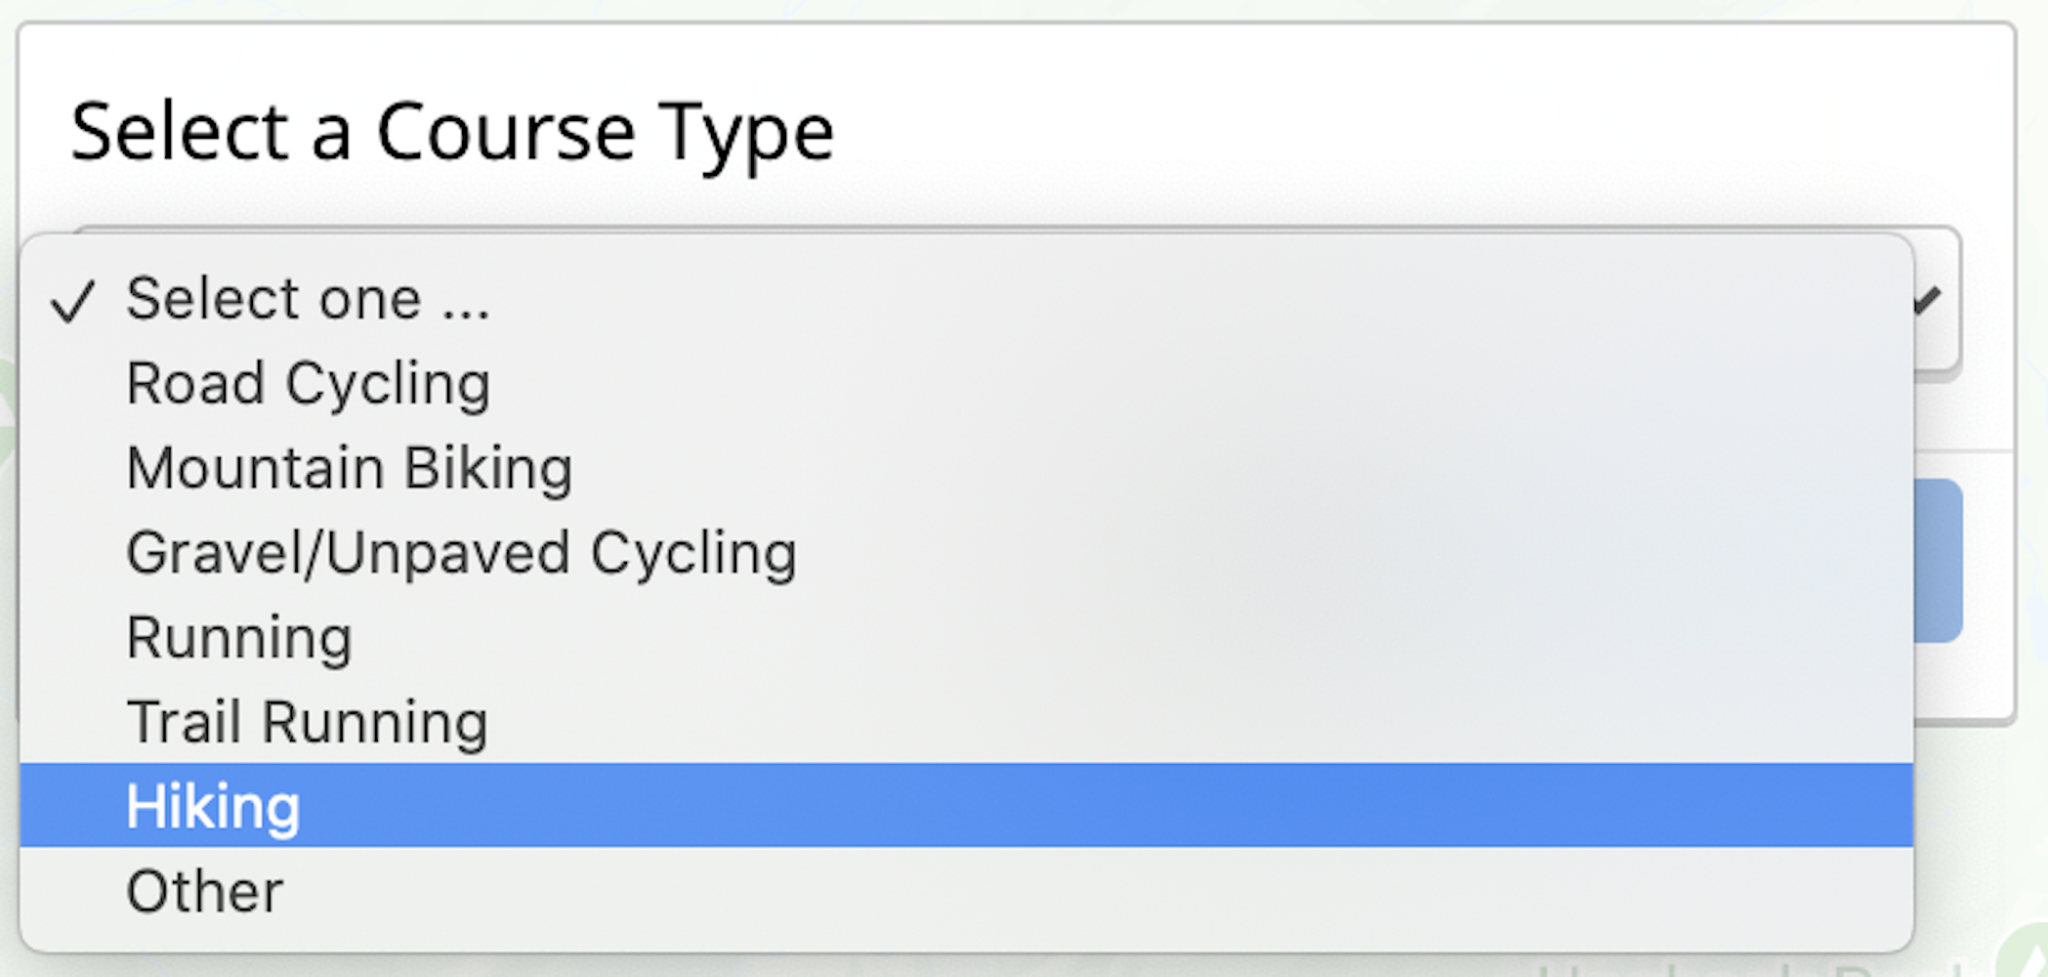 Select the course type for your activity